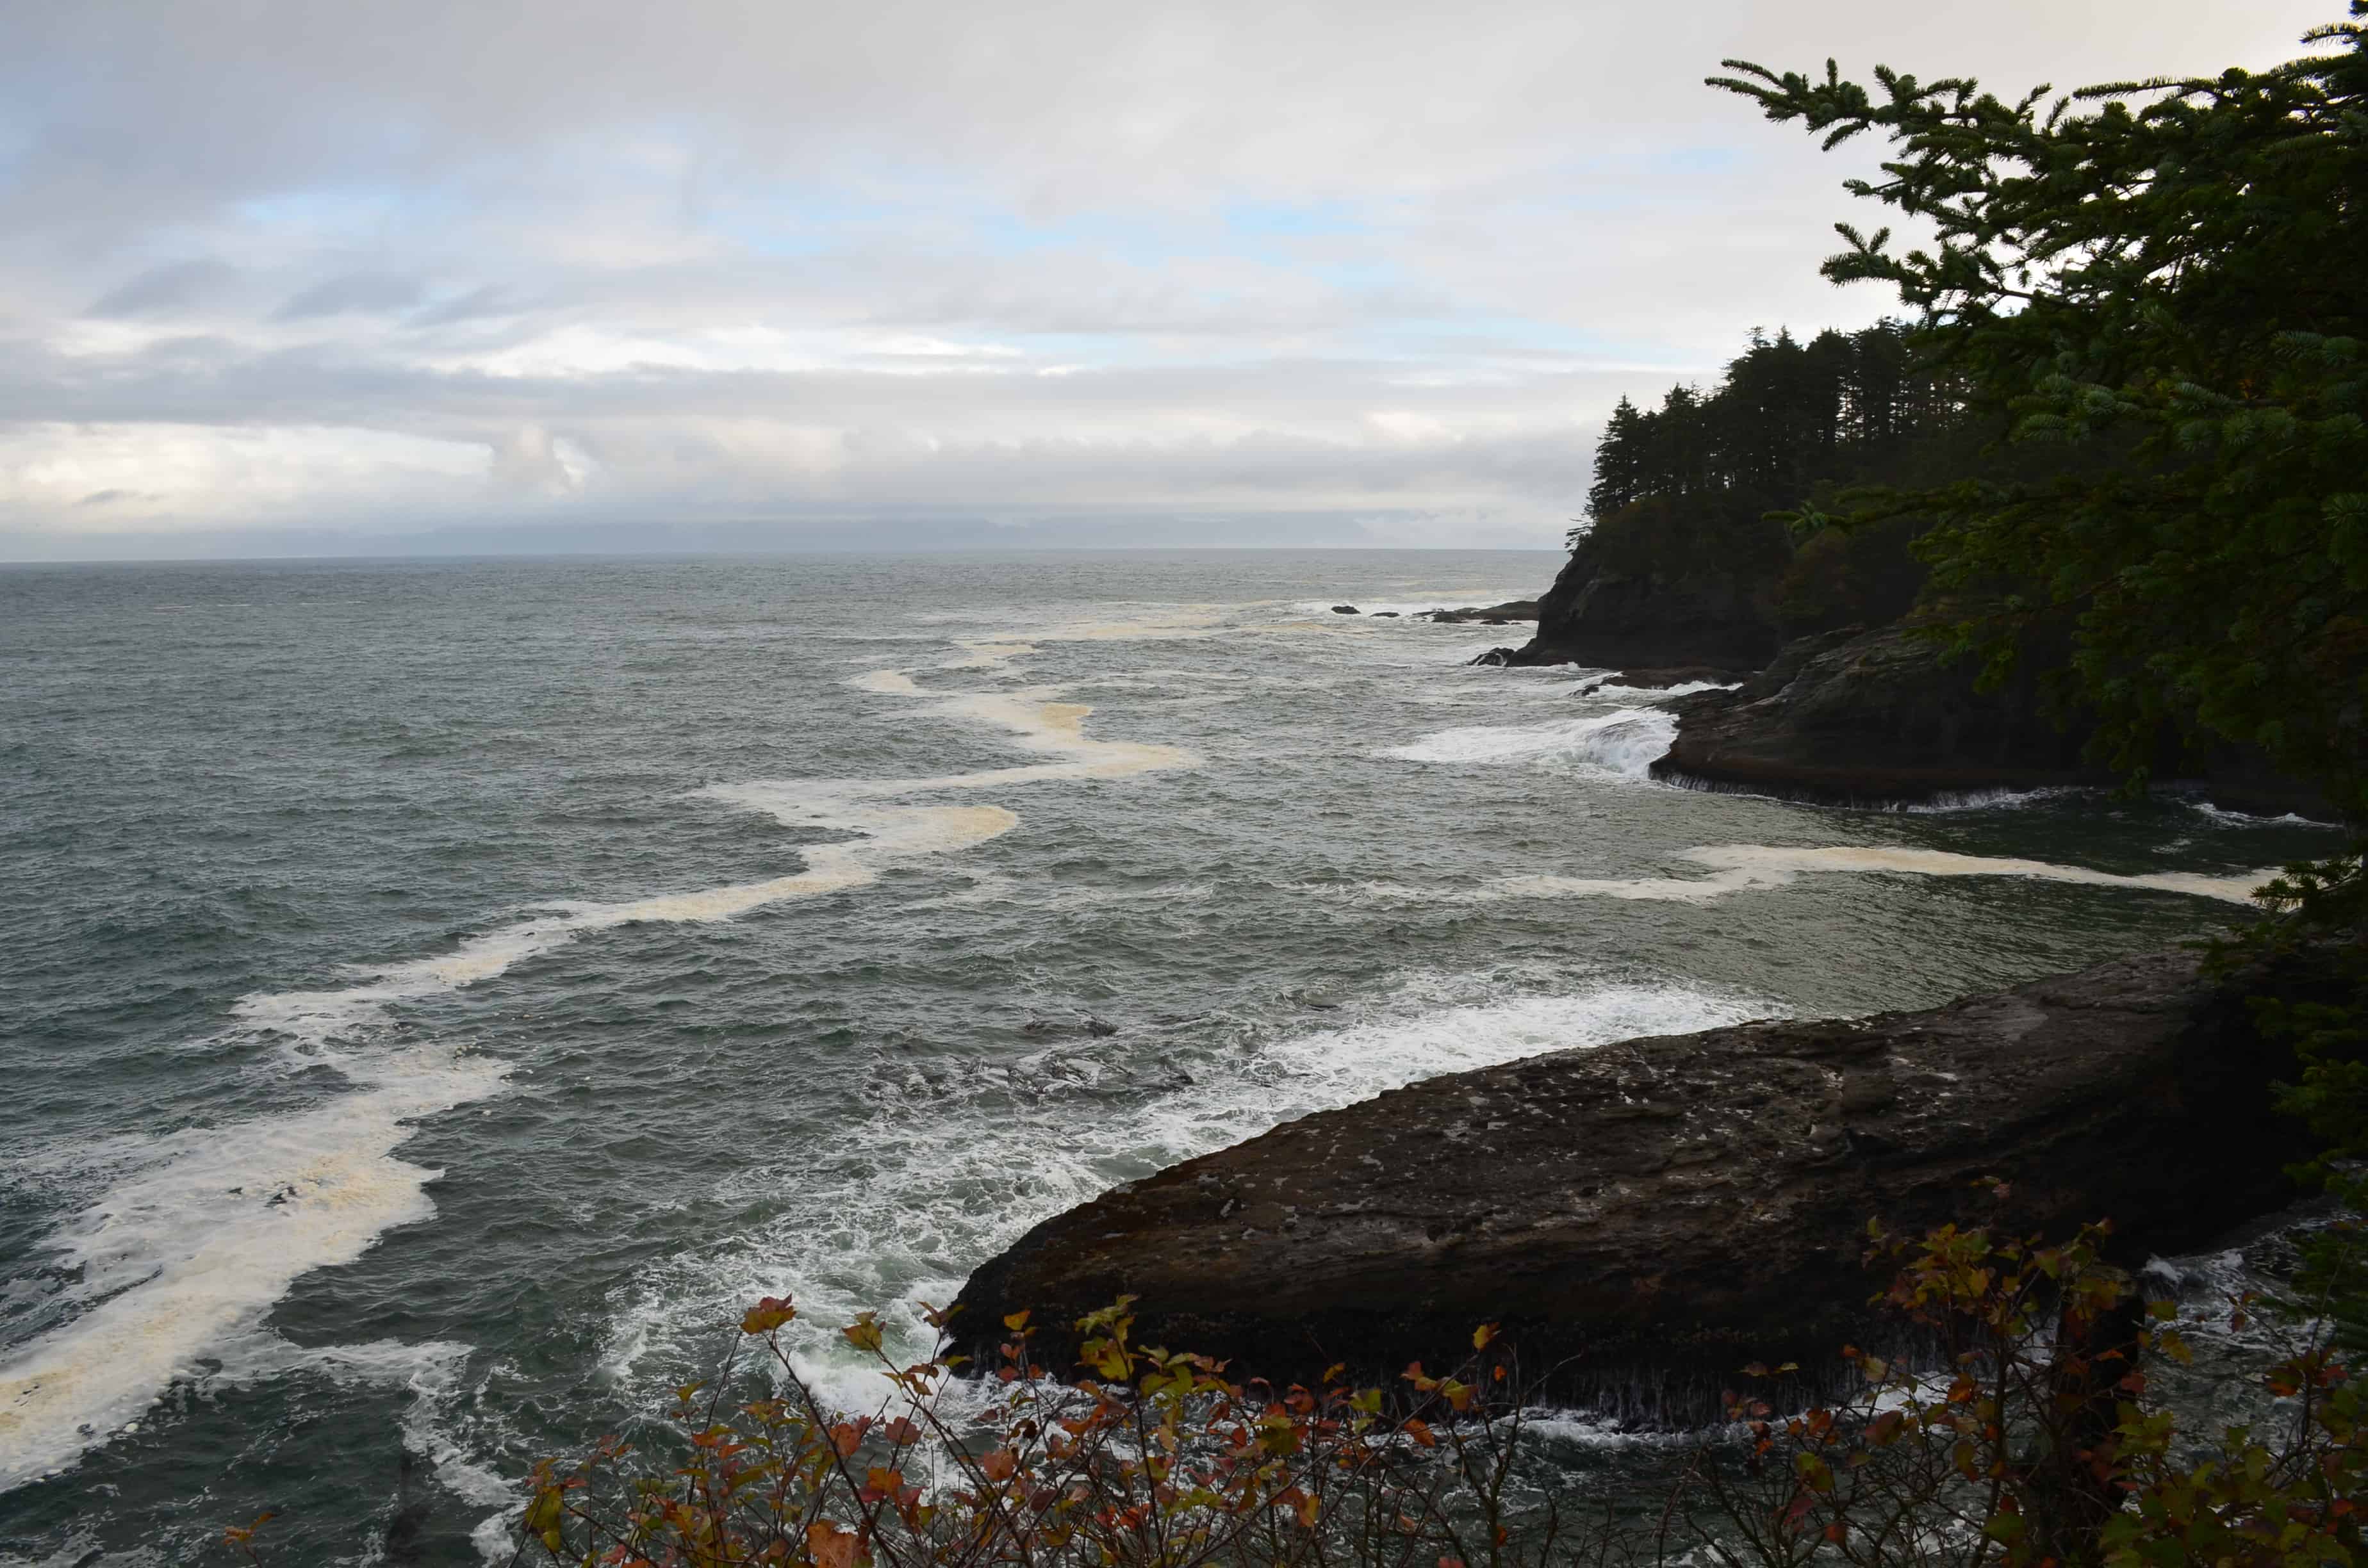 Looking north from the third viewpoint on the Cape Flattery Trail on the Makah Reservation in Washington